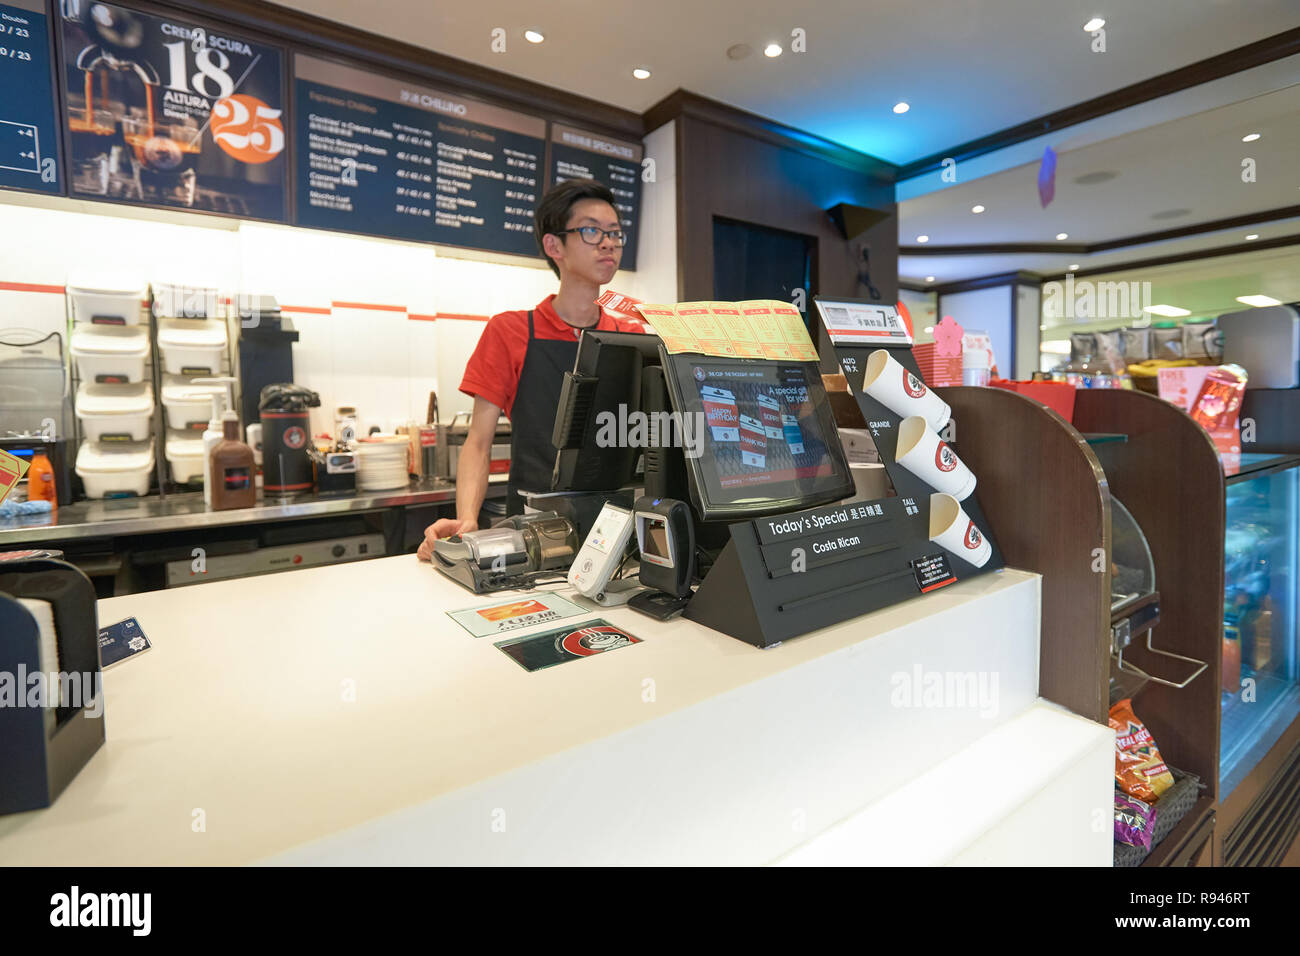 HONG KONG - JANUARY 28, 2016: young male cafe worker at Pacific Coffee. Stock Photo